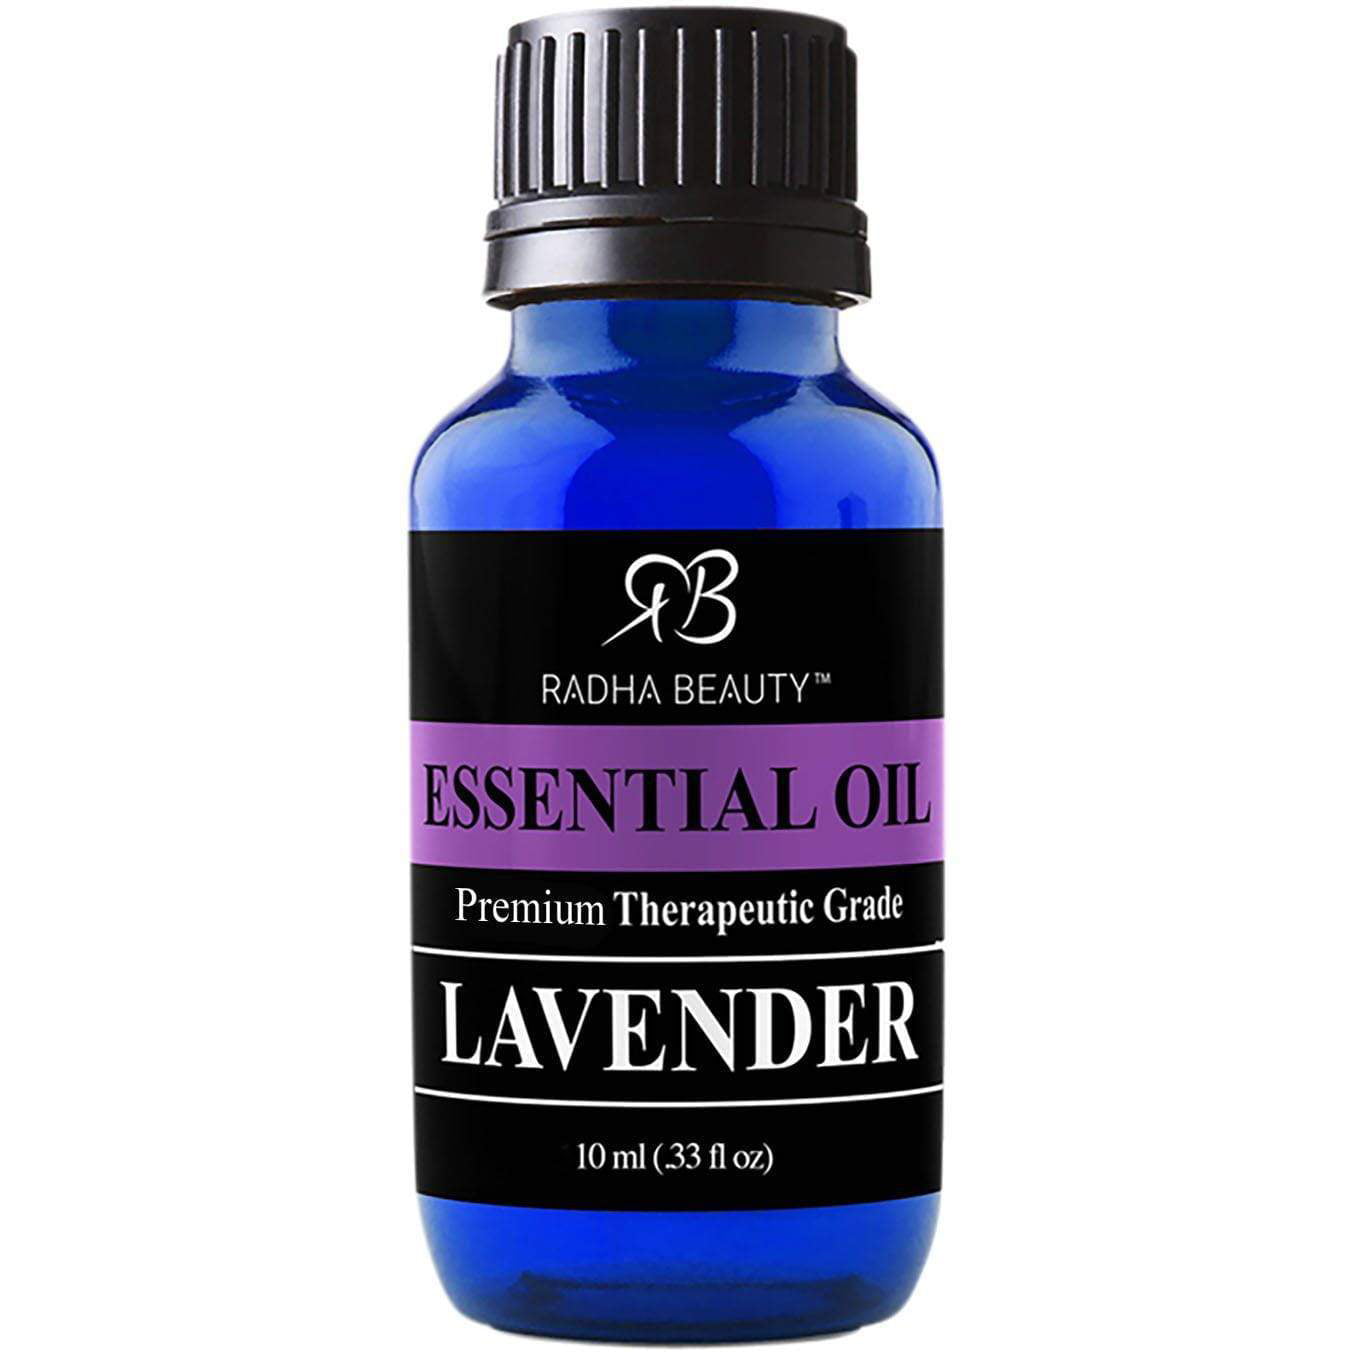 Radha Beauty Lavender Essential Oil 10mL - Natural & Therapeutic Grade, Steam Distilled for Aromatherapy, Relaxation, Sleep, Laundry, Meditation, Massage